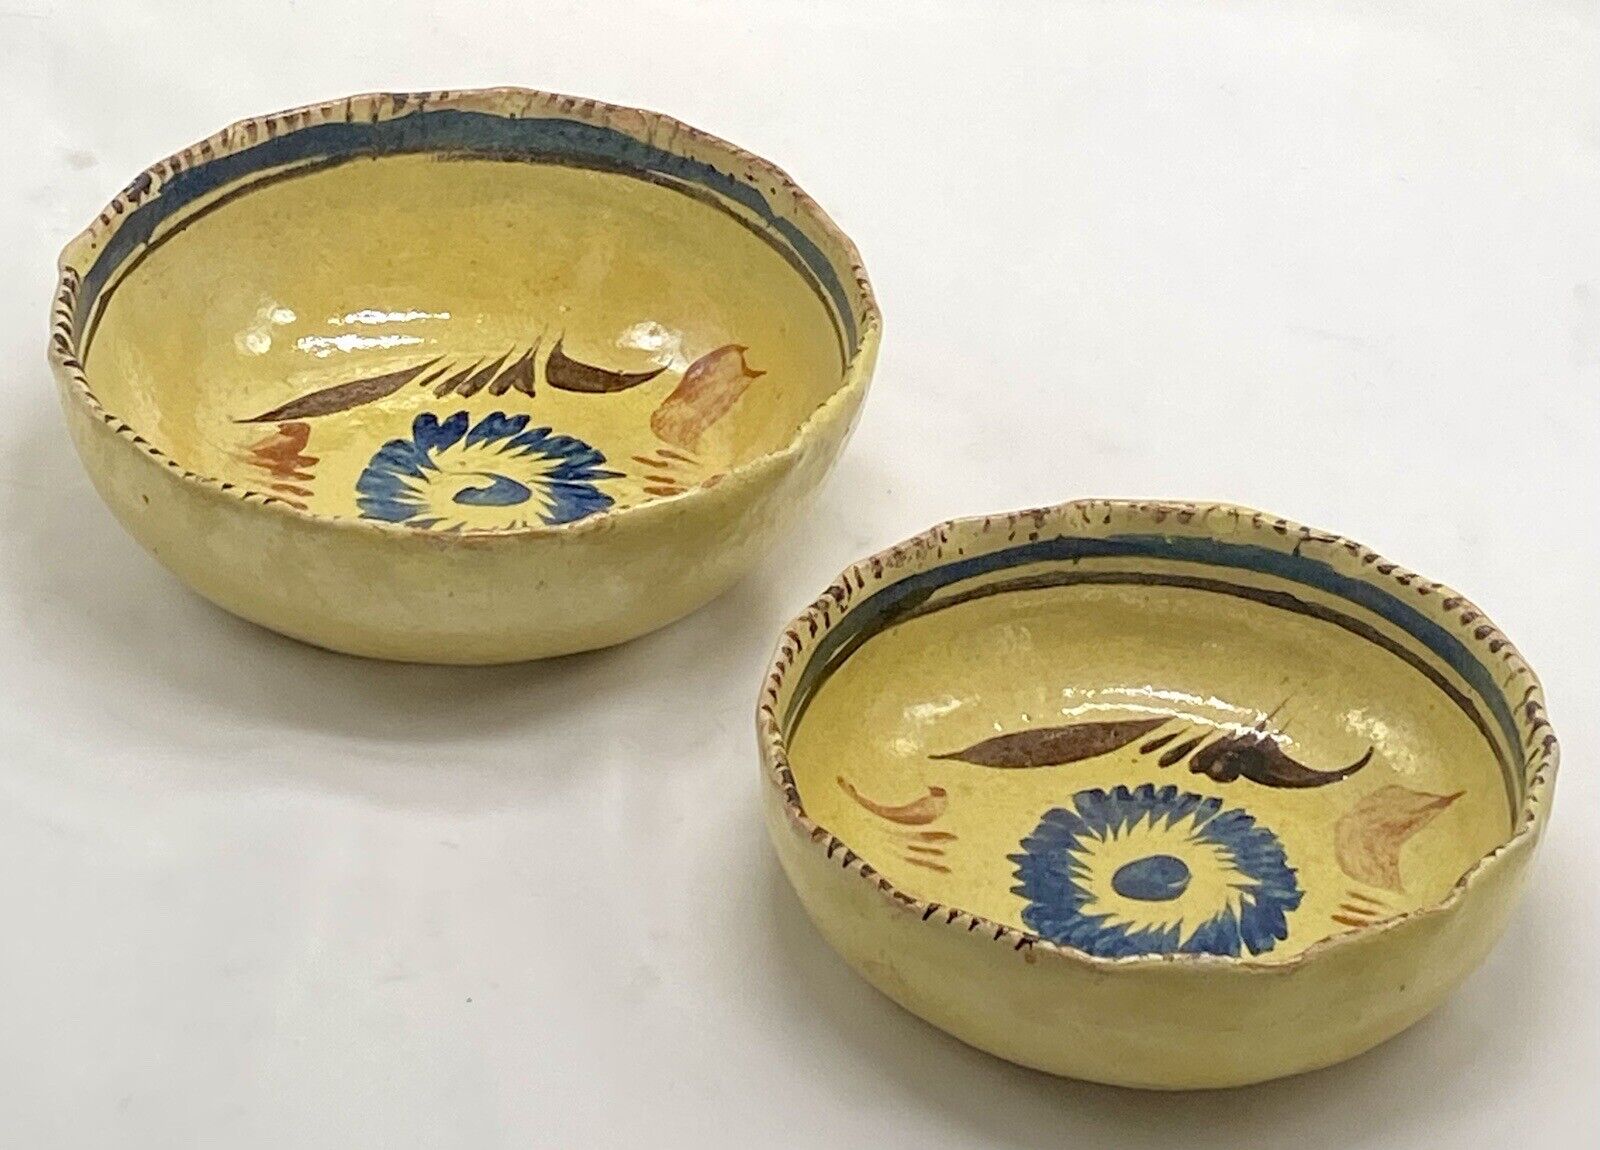 VTG 1940s Mexican Redware Hand-Painted Piecrust-Edge Set of 2 Nesting Bowls